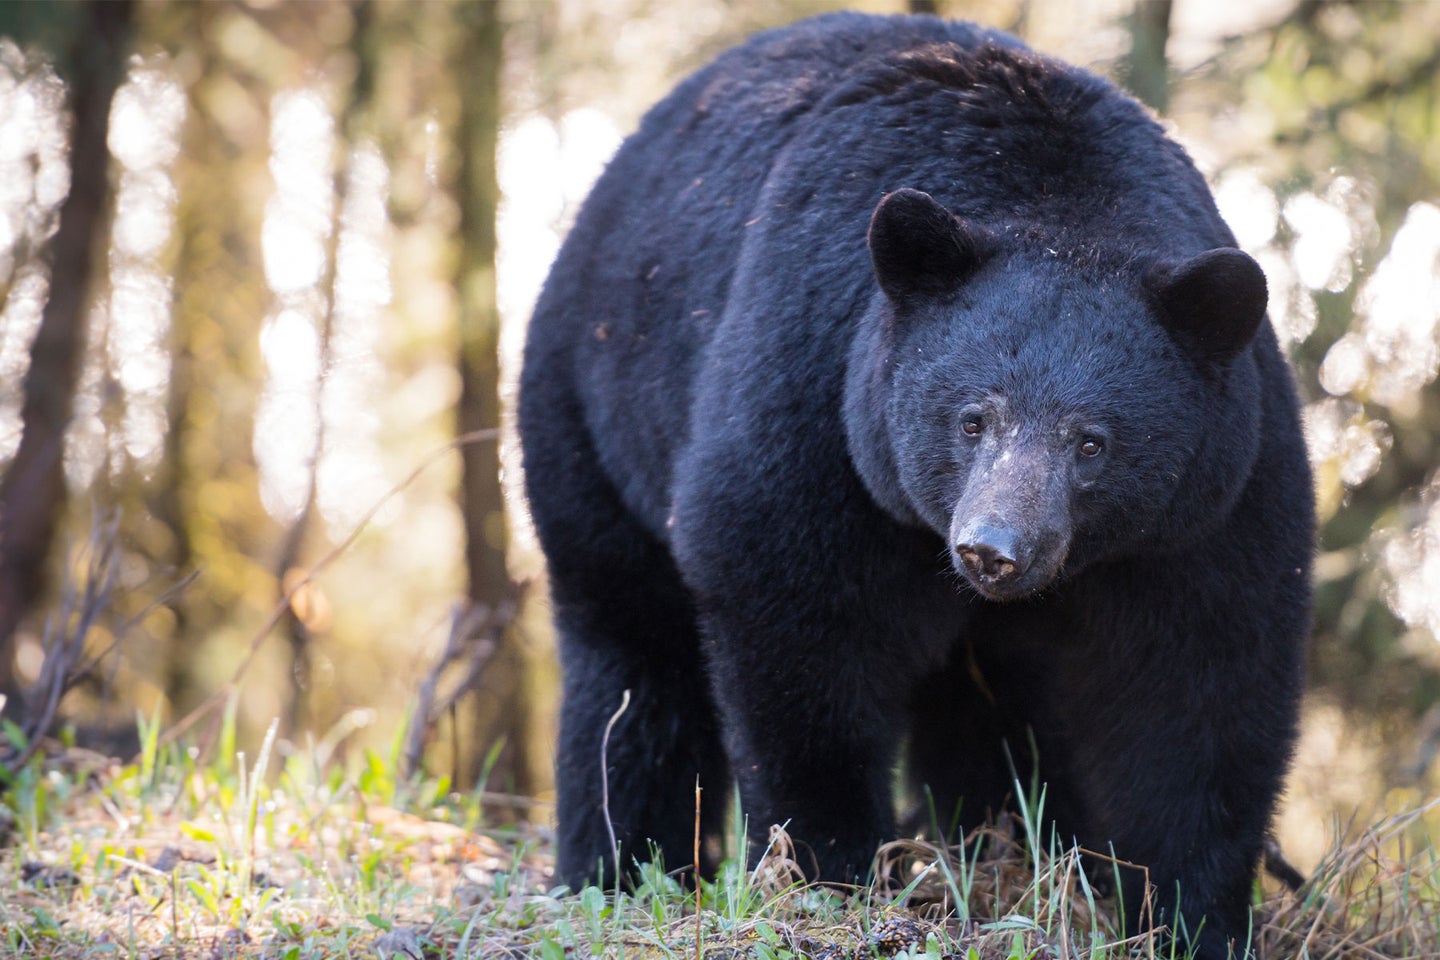 Colorado is home to between 17,000 and 20,000 black bears.